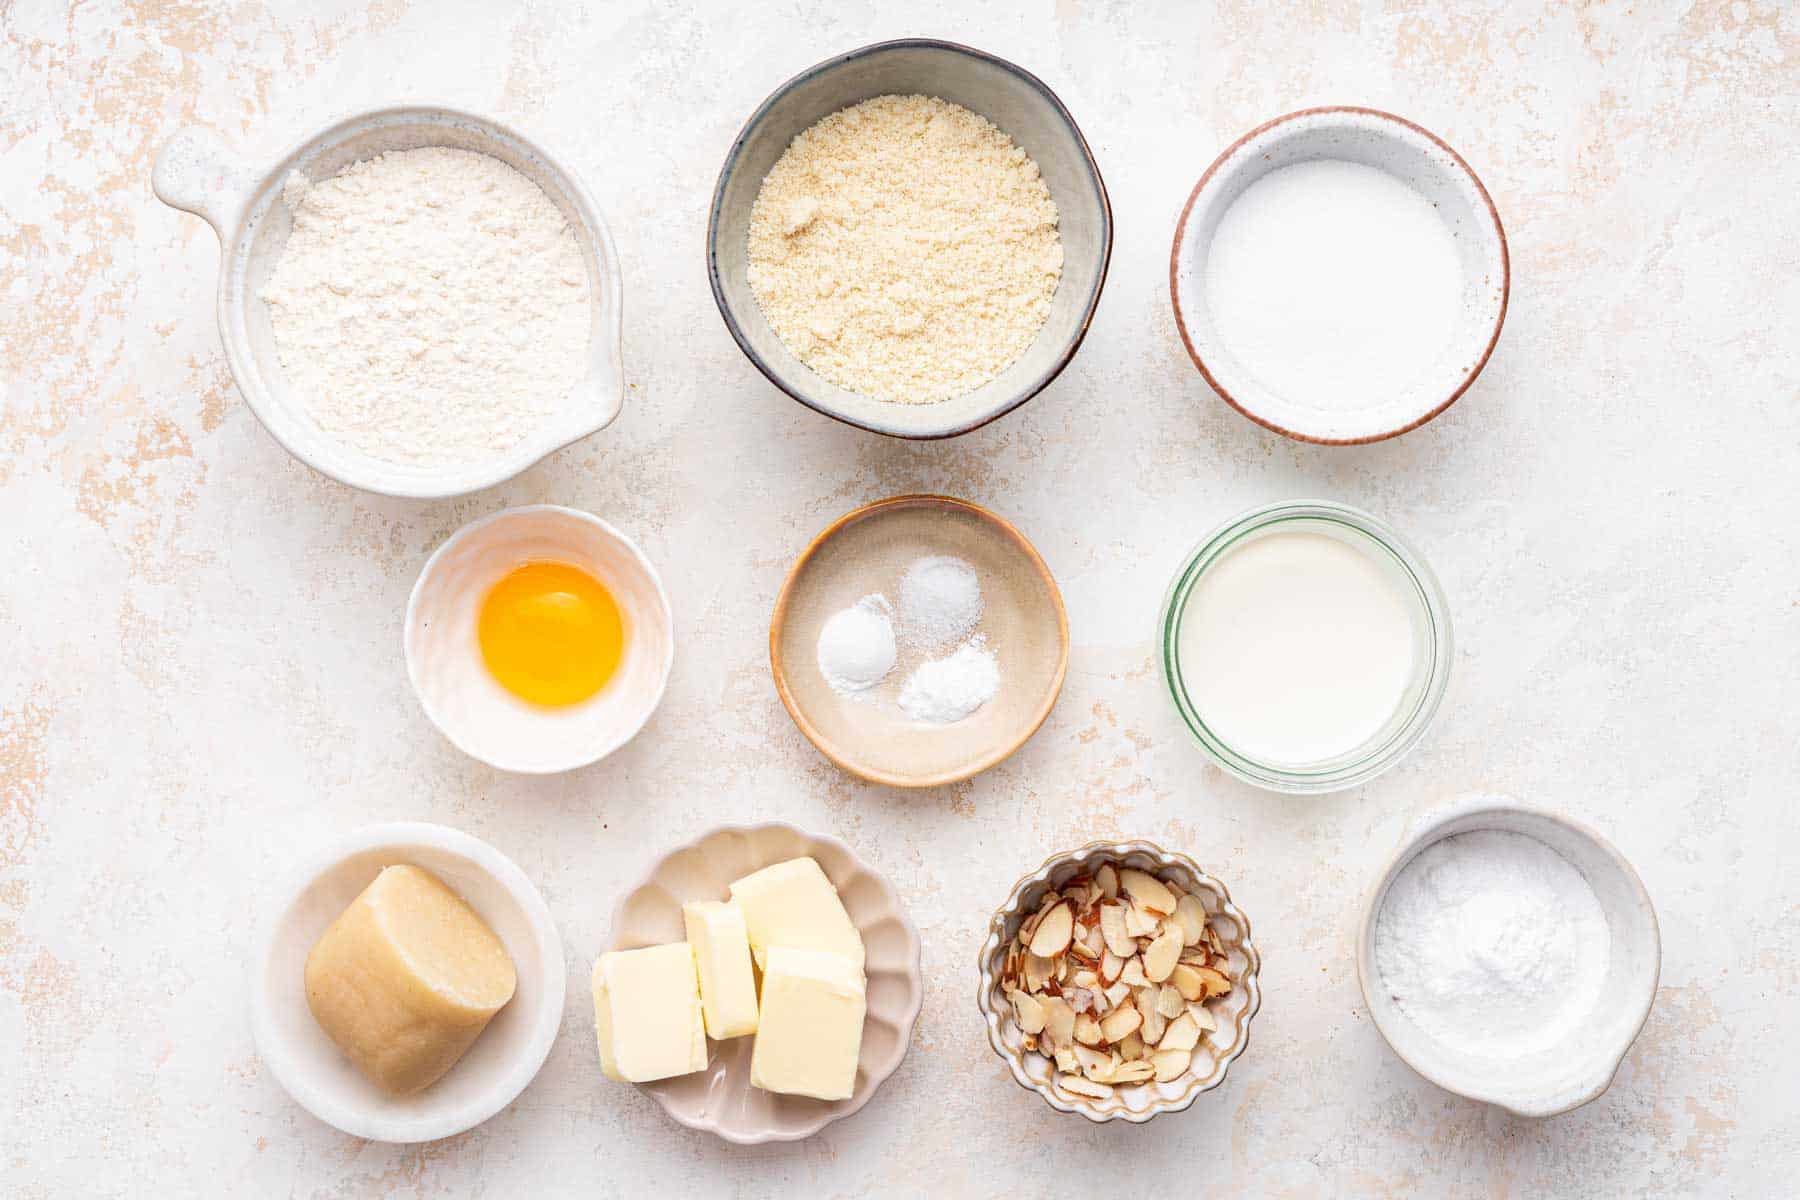 Flours, sugars and egg yolk in small bowls on white counter.